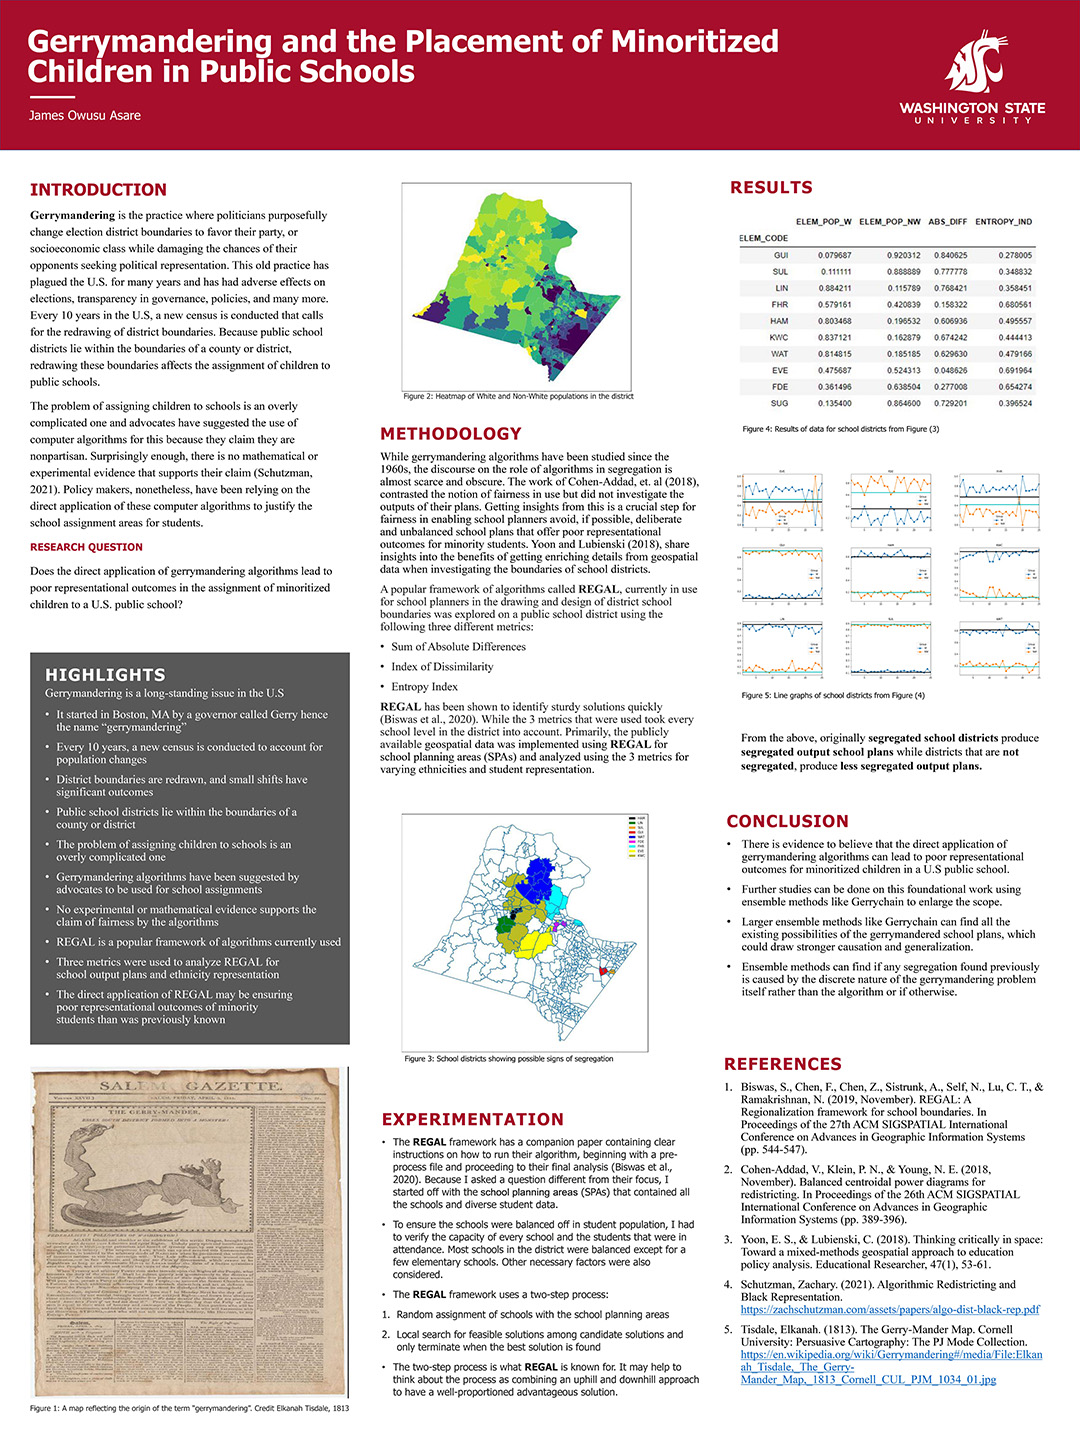 WSU Showcase Poster: Gerrymandering and the Placement of Minoritized Children in Public Schools; James Owusu Asare